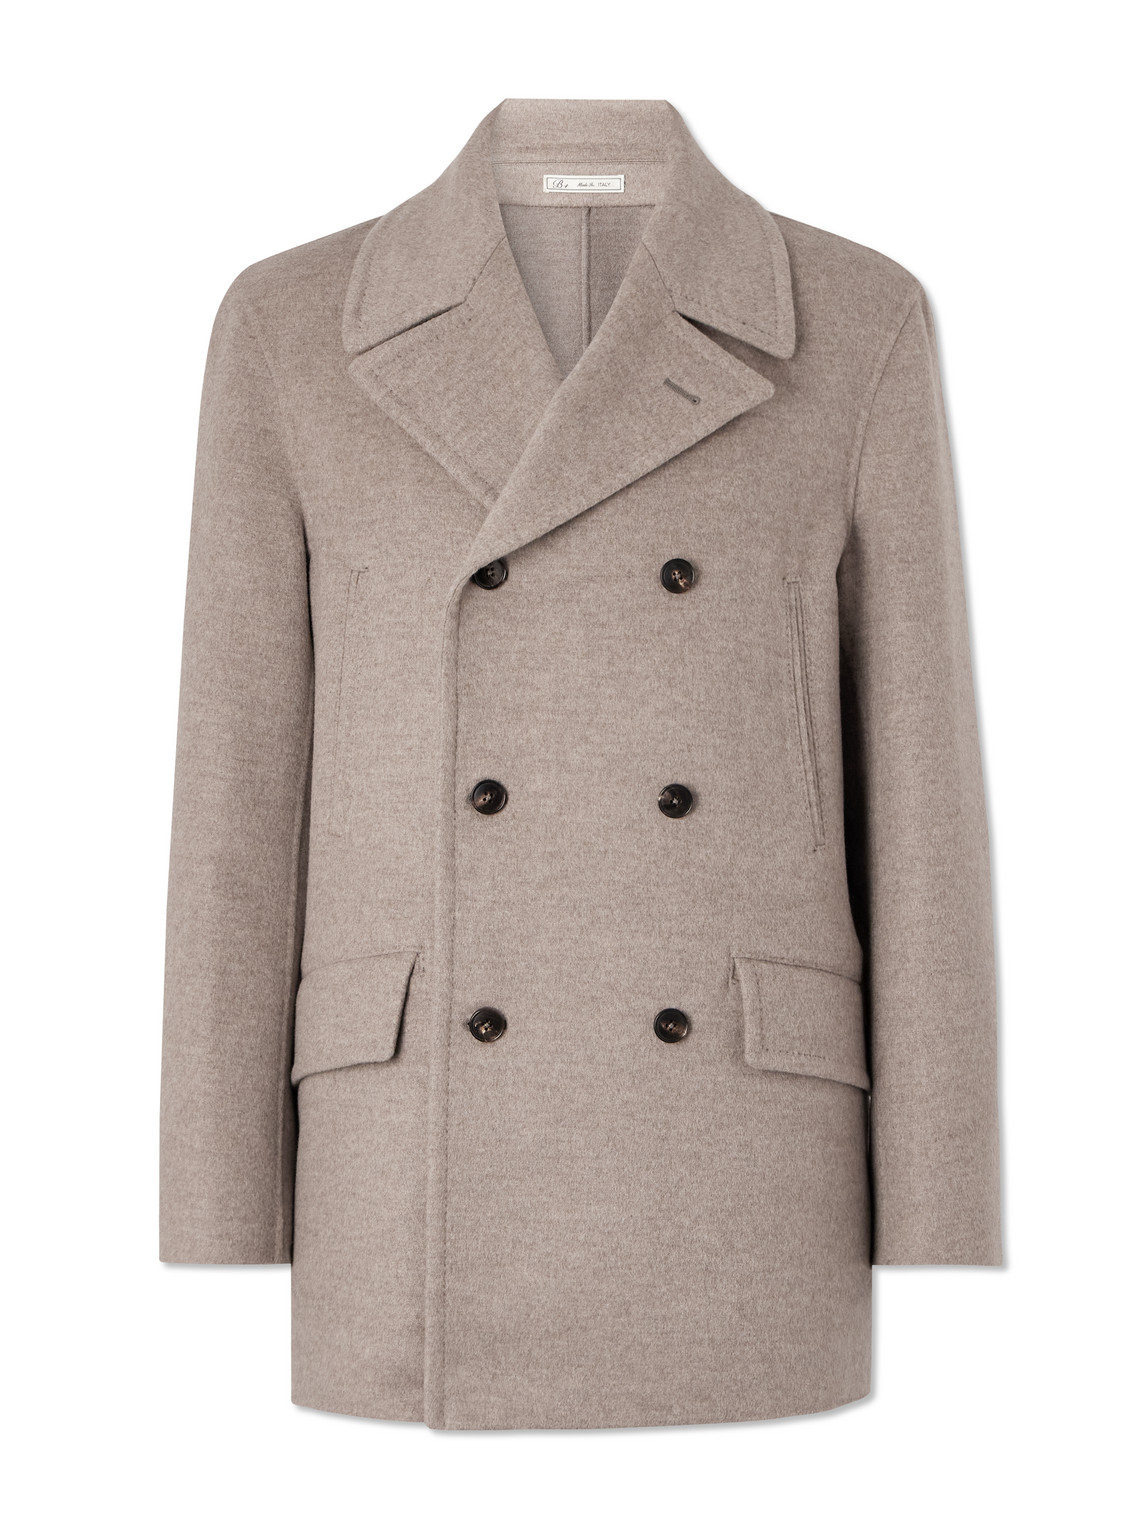 Umit Benan B+ Wool And Cashmere-blend Peacoat In Neutrals